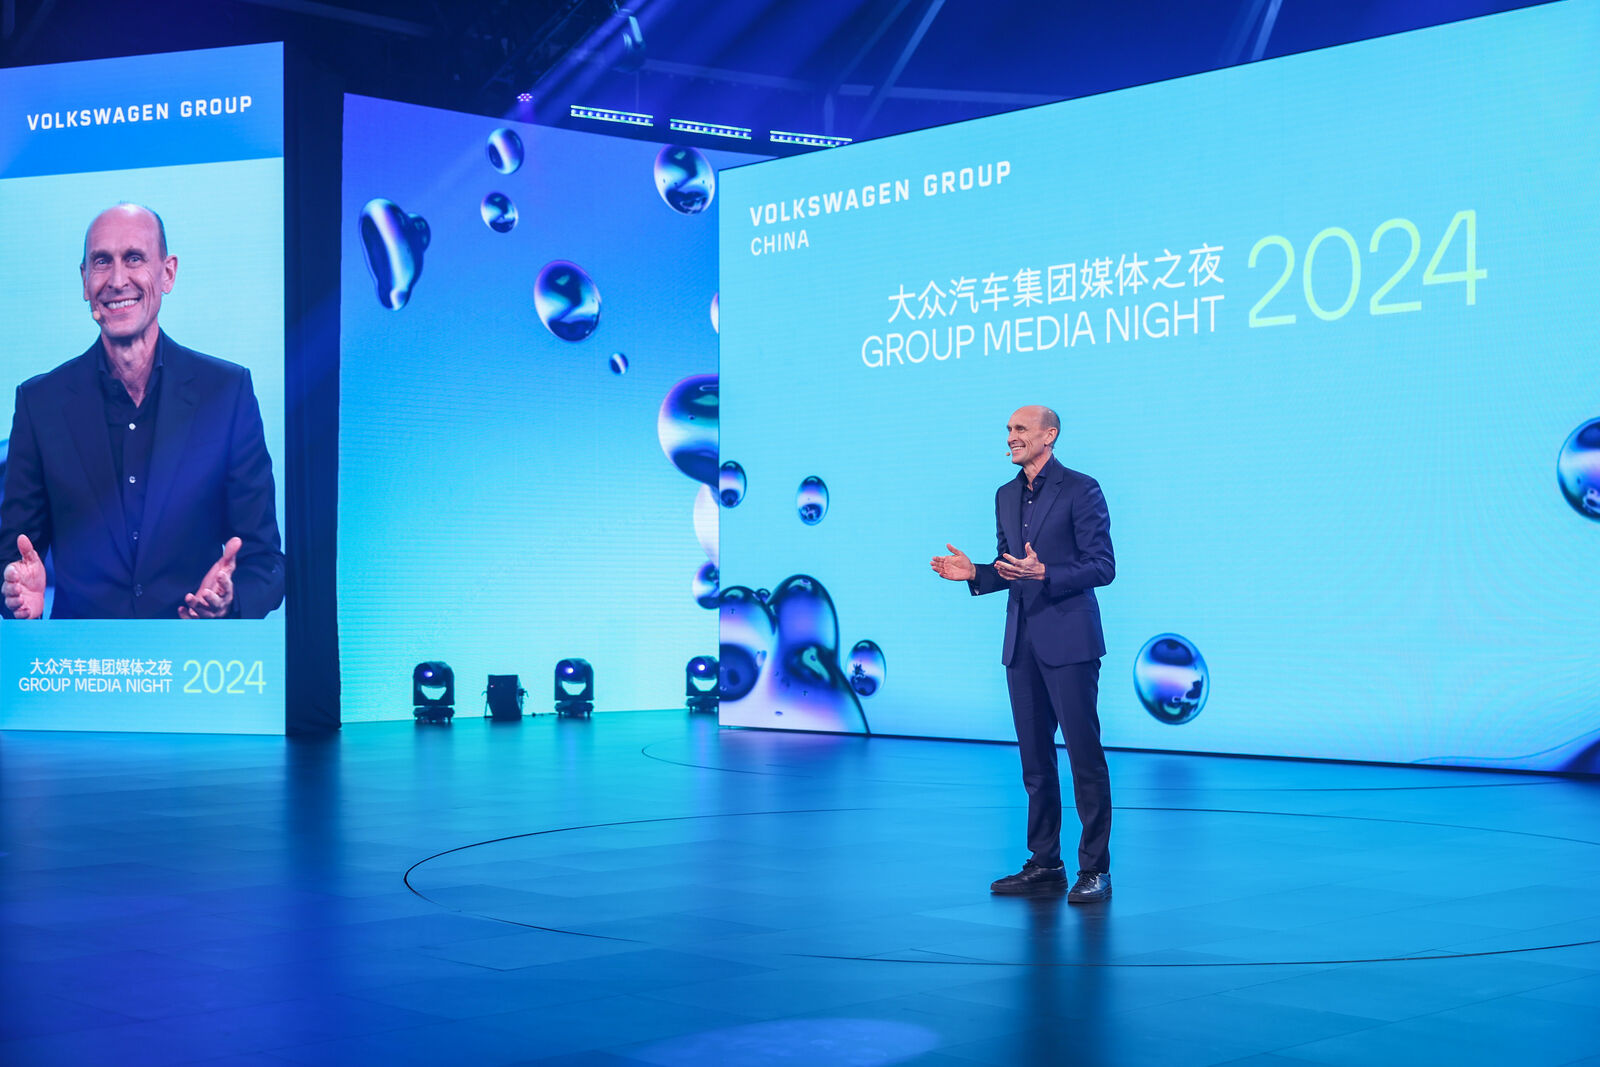 A speaker stands on stage during the "Group Media Night 2024" event, with large screens displaying the event's title and branding in English and Chinese.